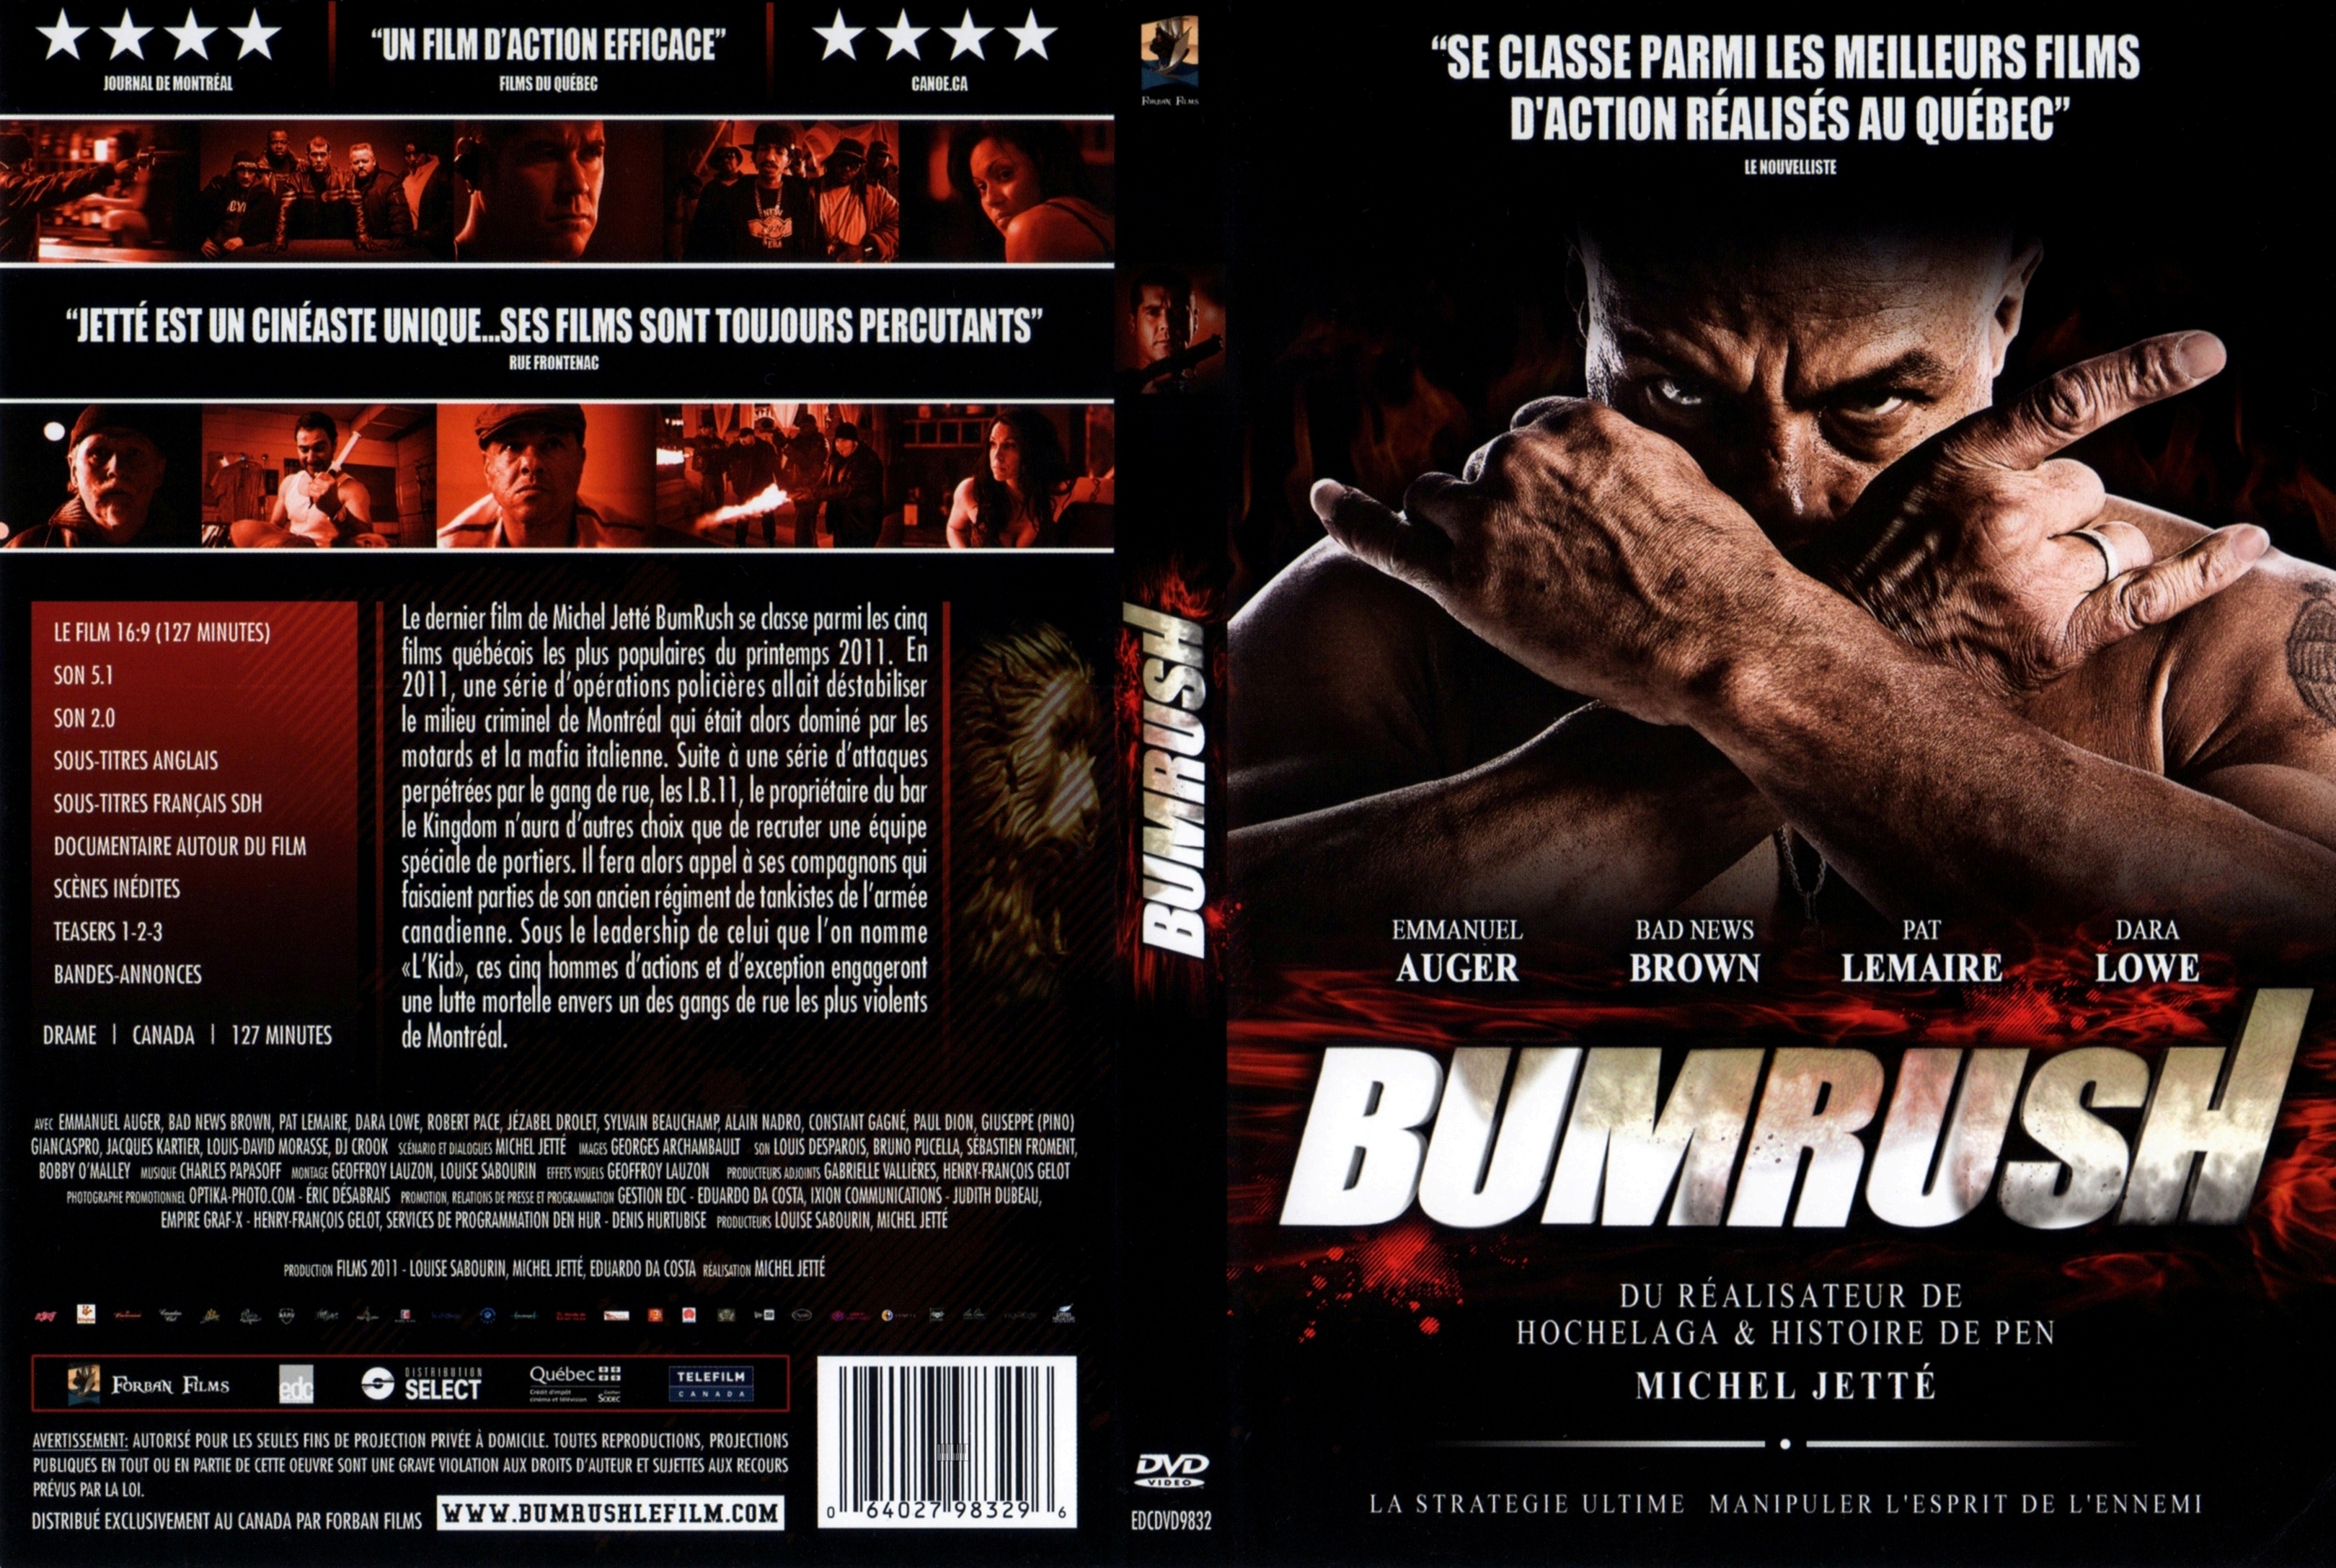 Jaquette DVD Bumrush (Canadienne)